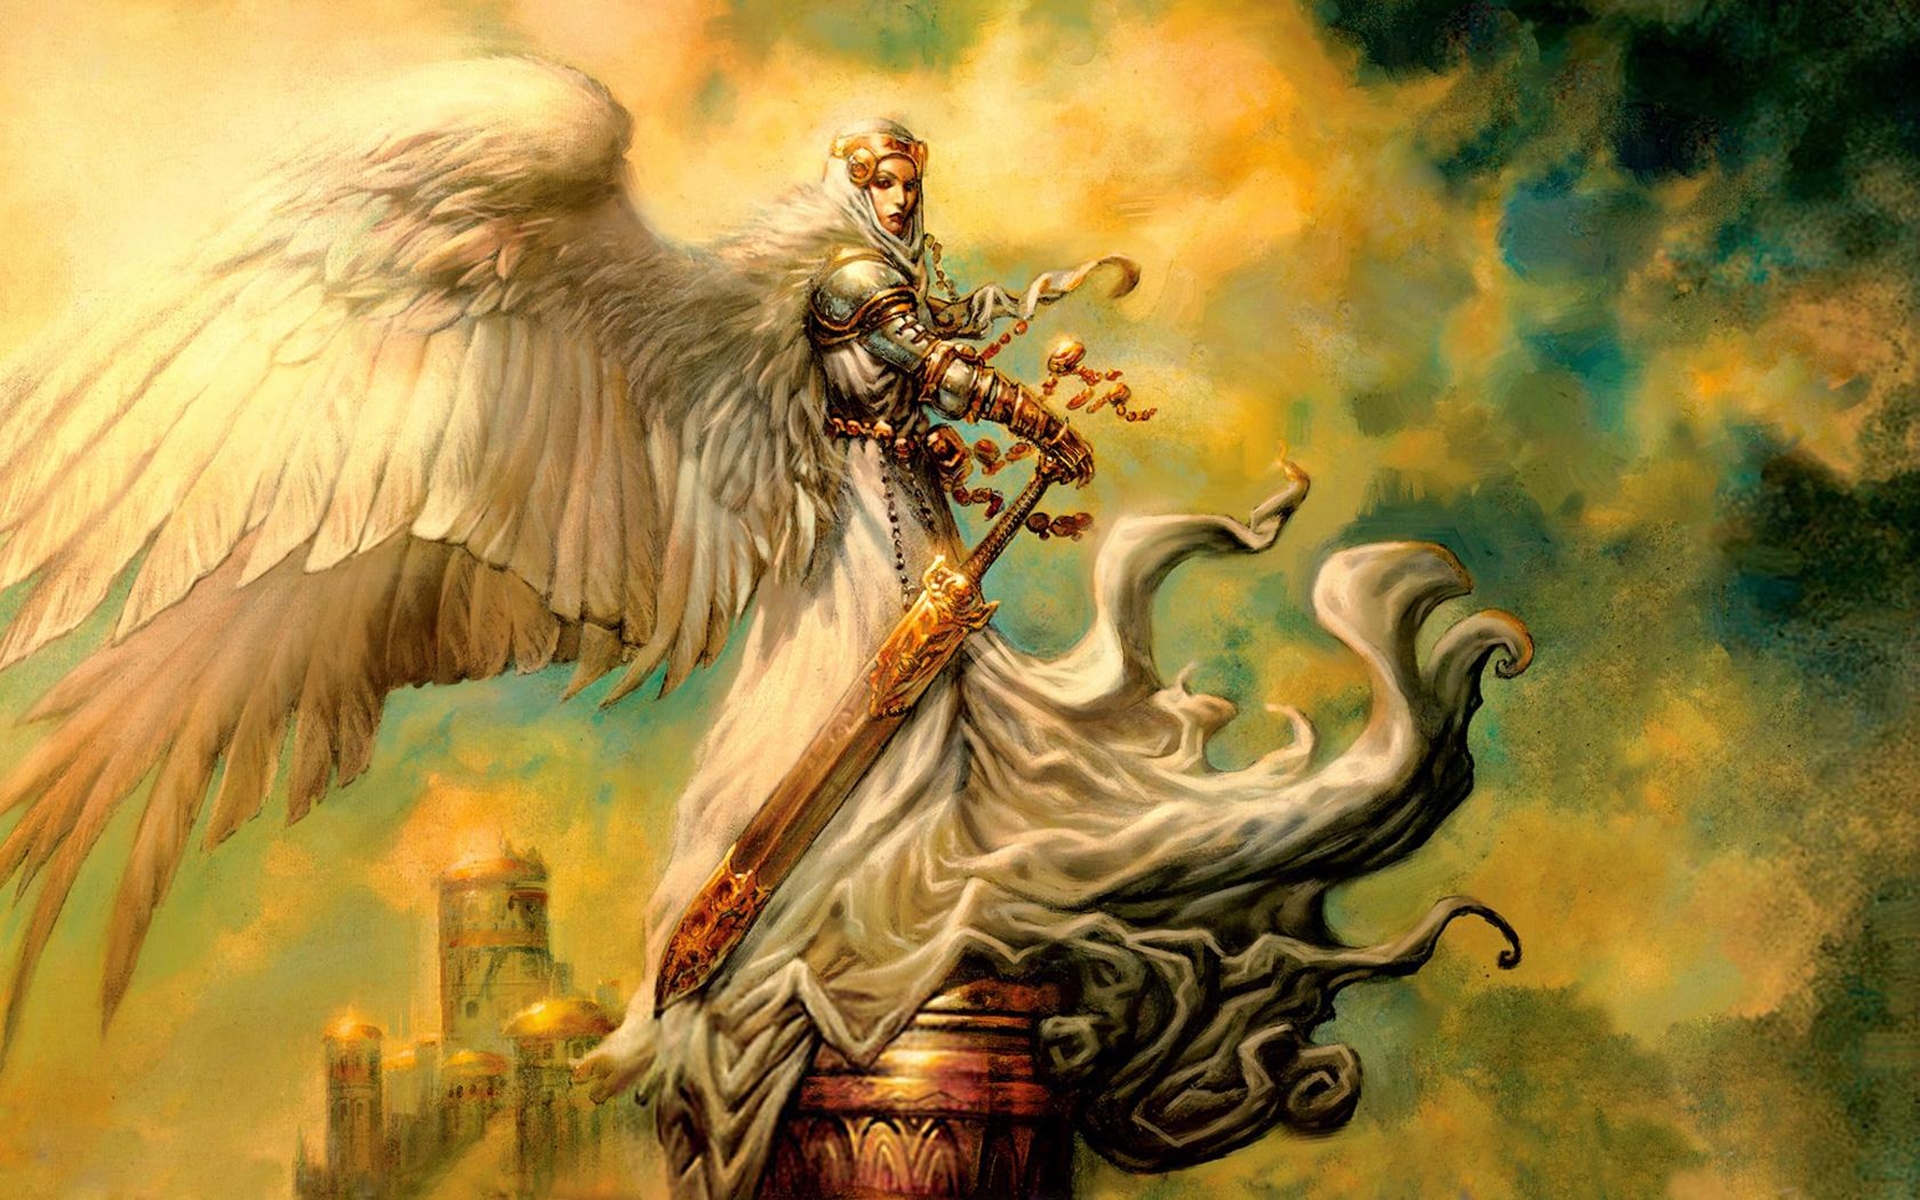 Avenging Angel, a majestic fantasy warrior with wings and a sword.